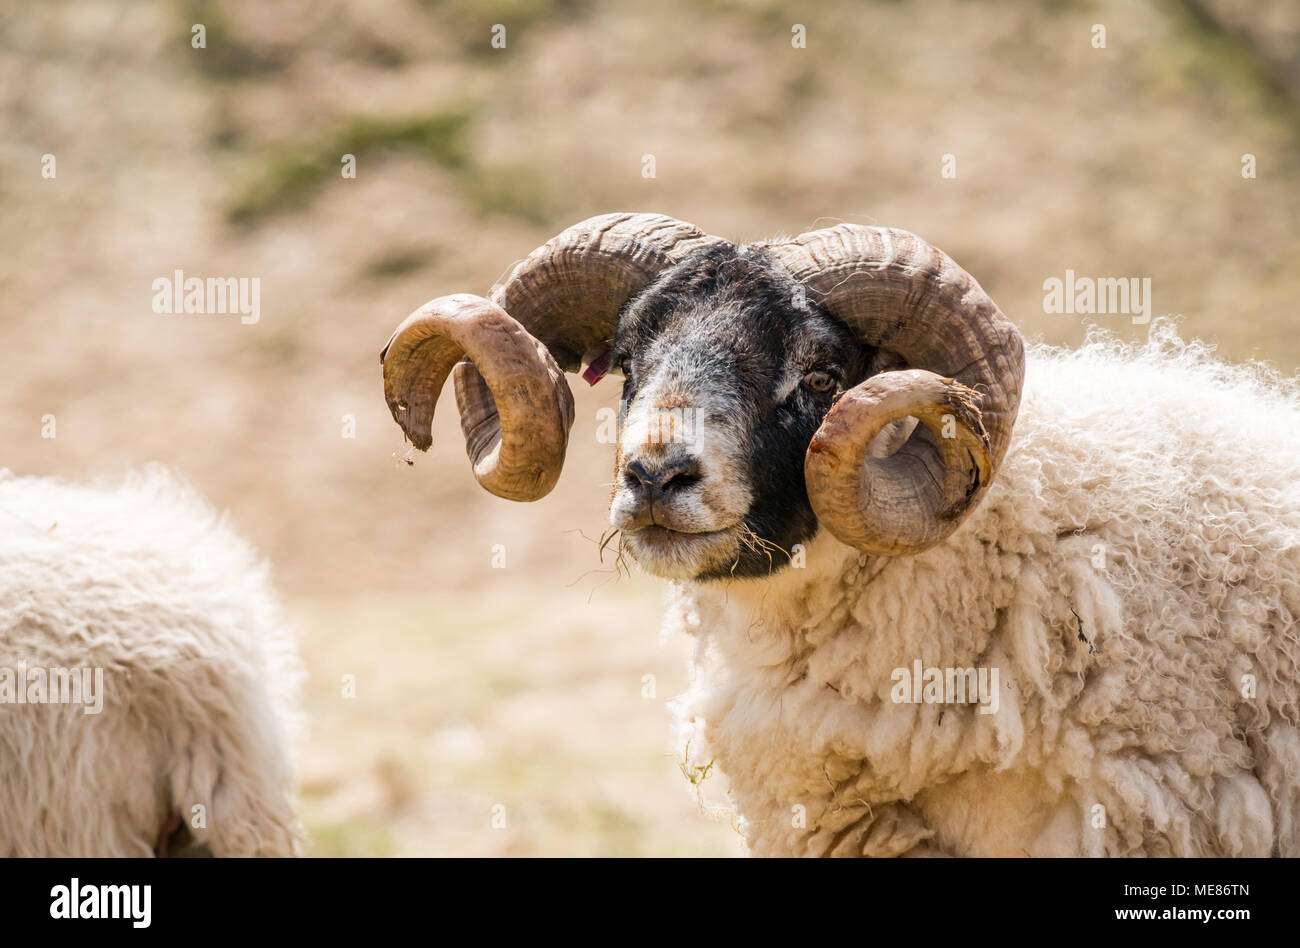 West Linton, Scottish Borders, Scotland, United Kingdom, April 21st 2018.  Spring sunshine in the countryside, with a Scottish blackface ram with curly horns in a field Stock Photo